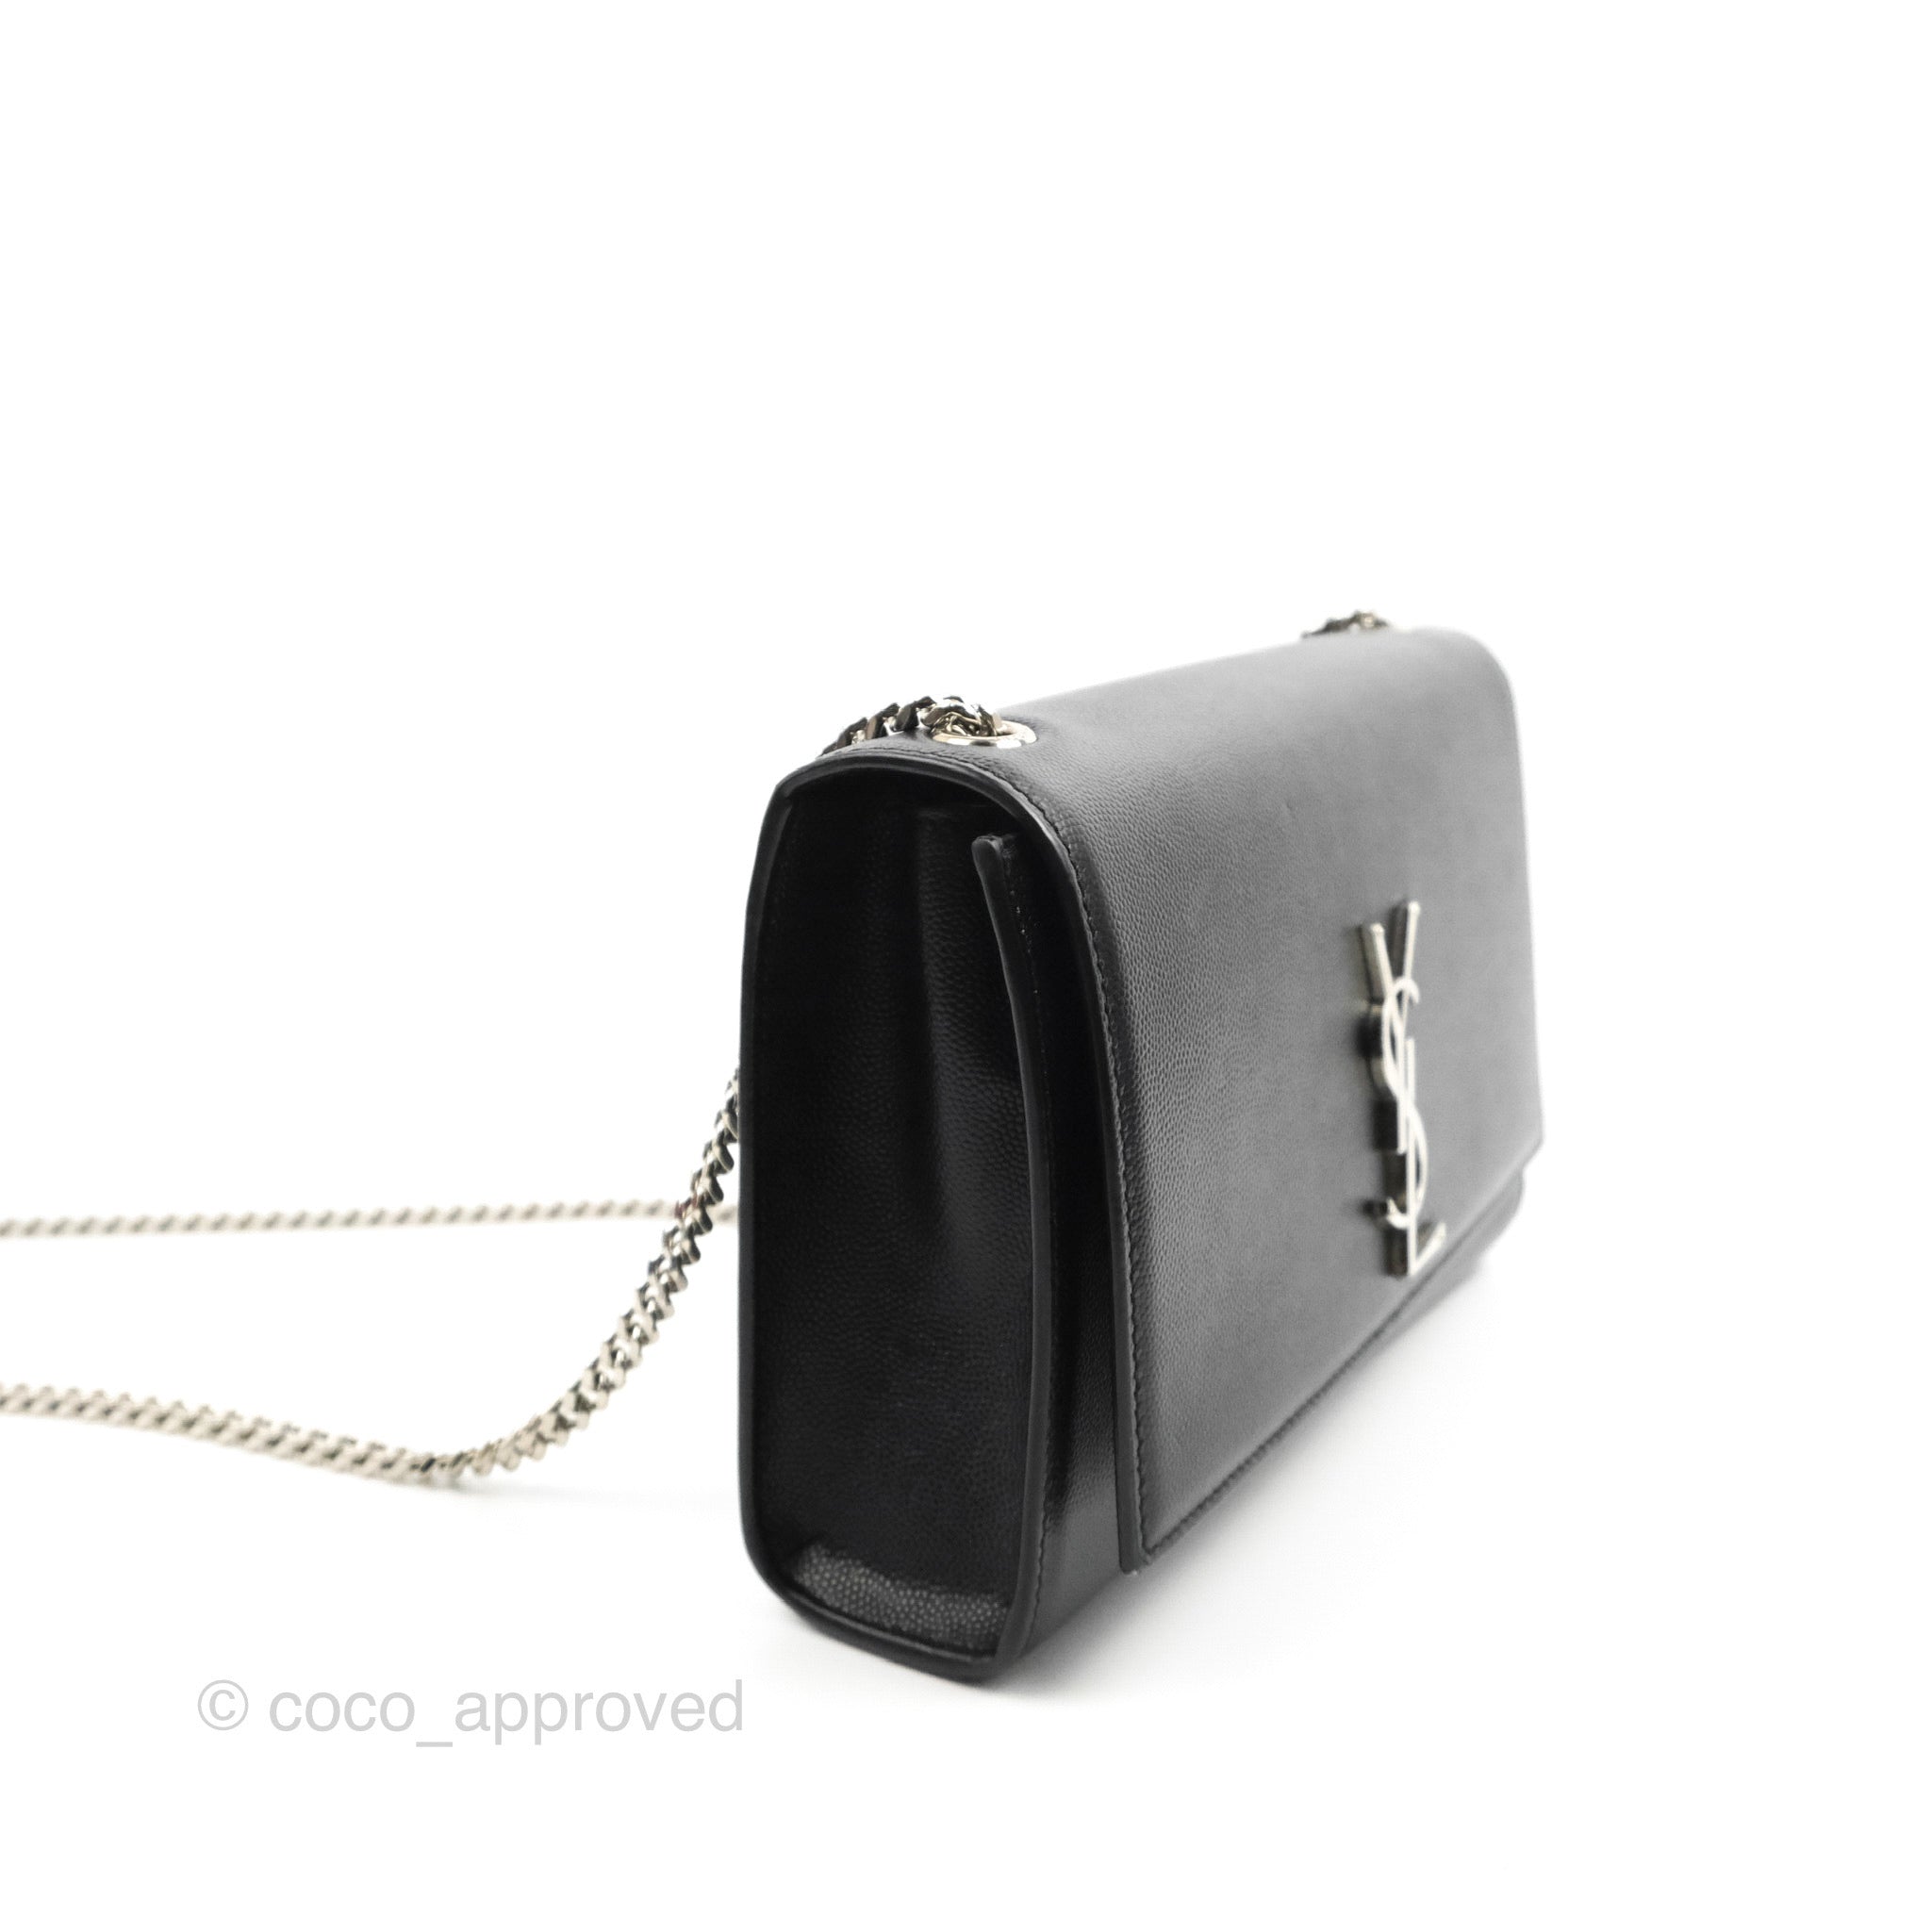 SAINT LAURENT Kate Small bag in black leather with silver logo